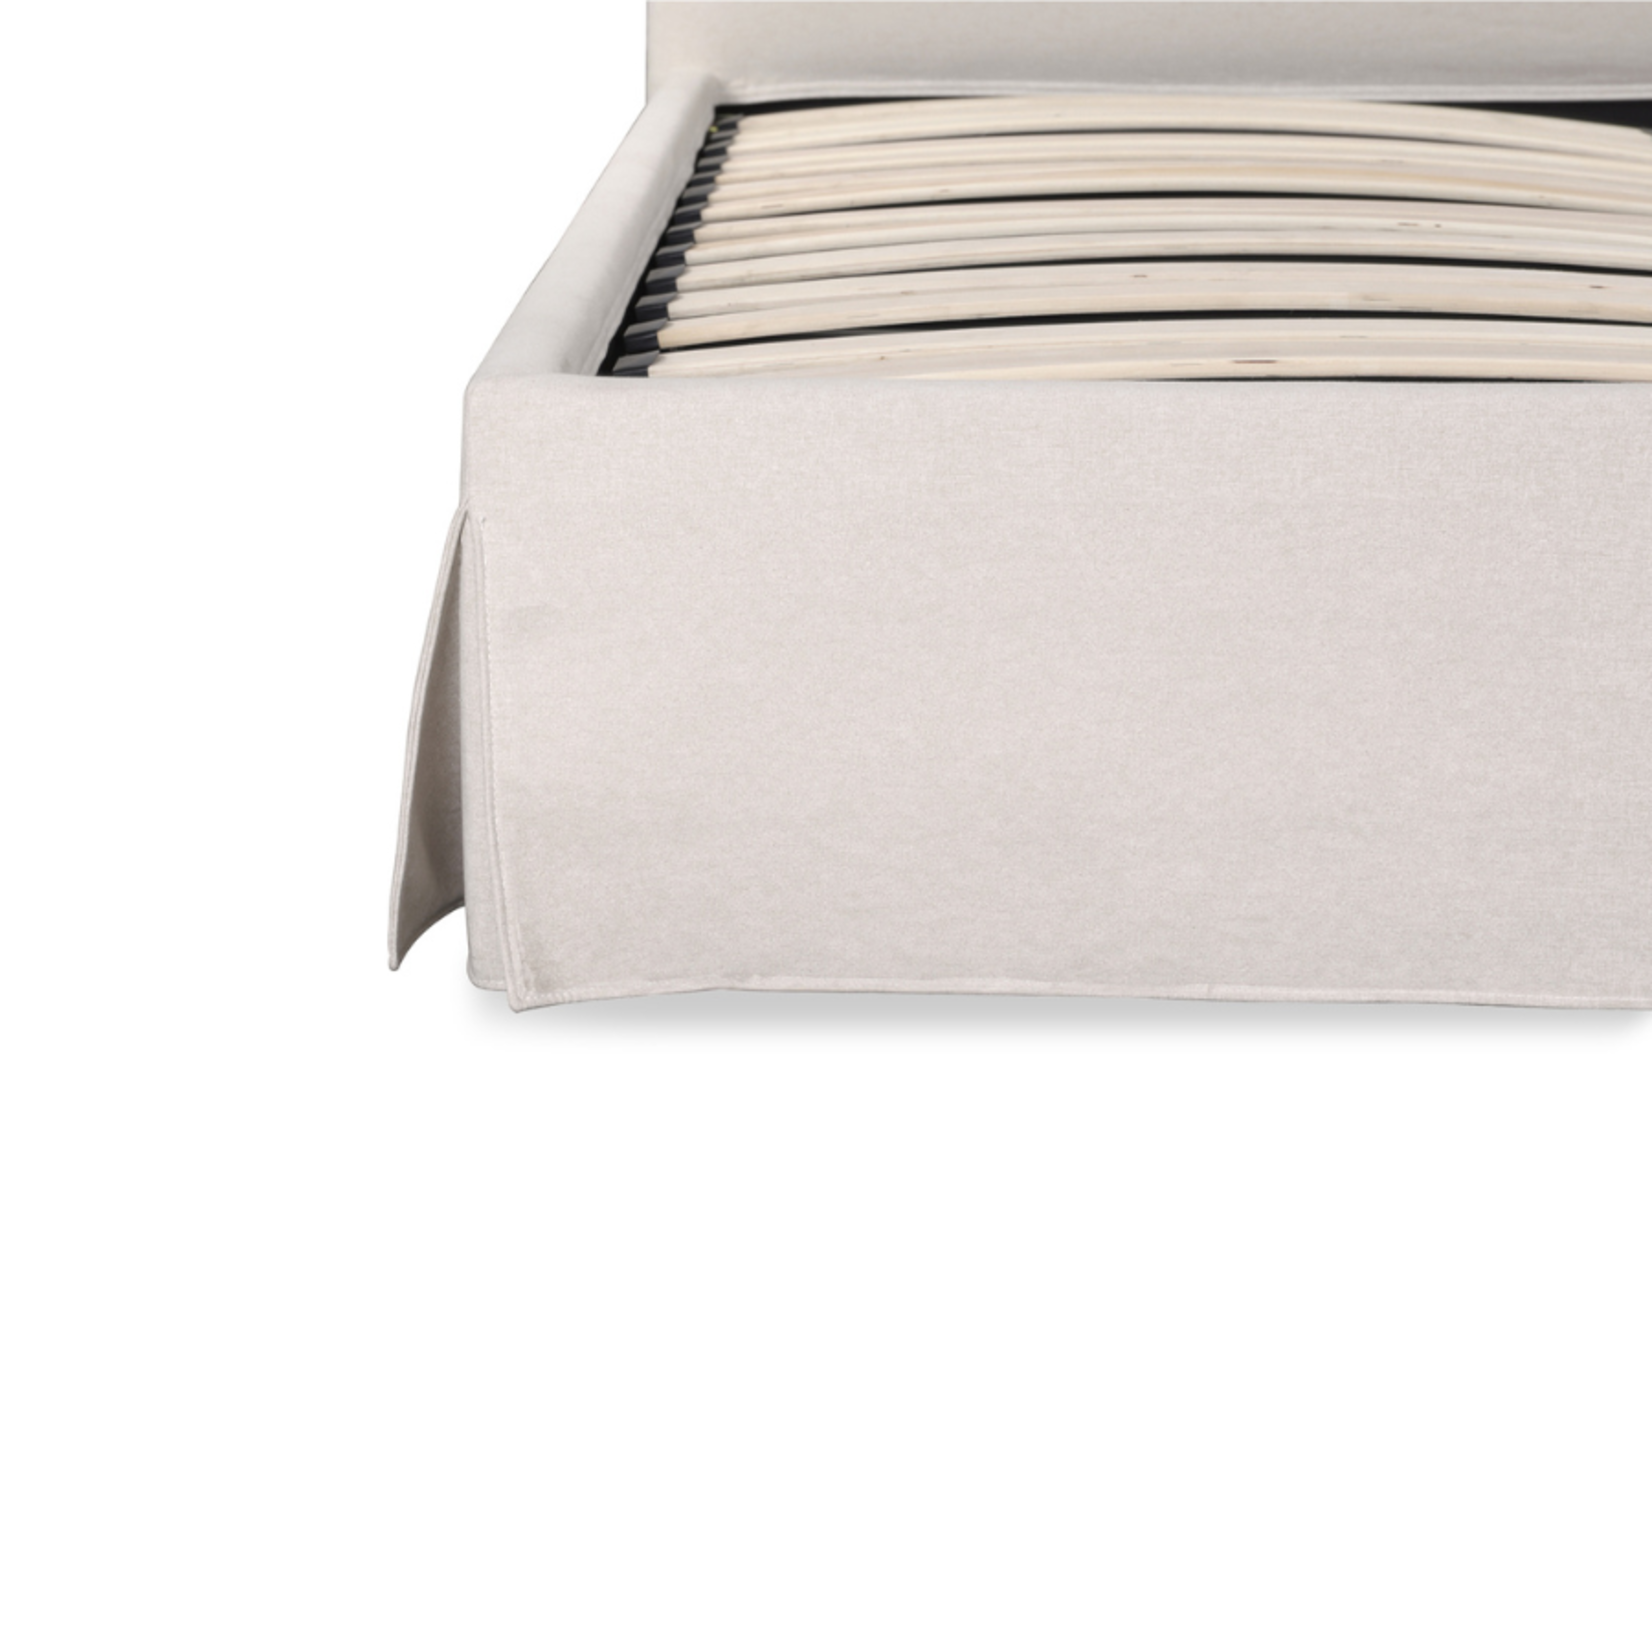 MOES HOME COLLECTION JOANNE QUEEN STORAGE BED